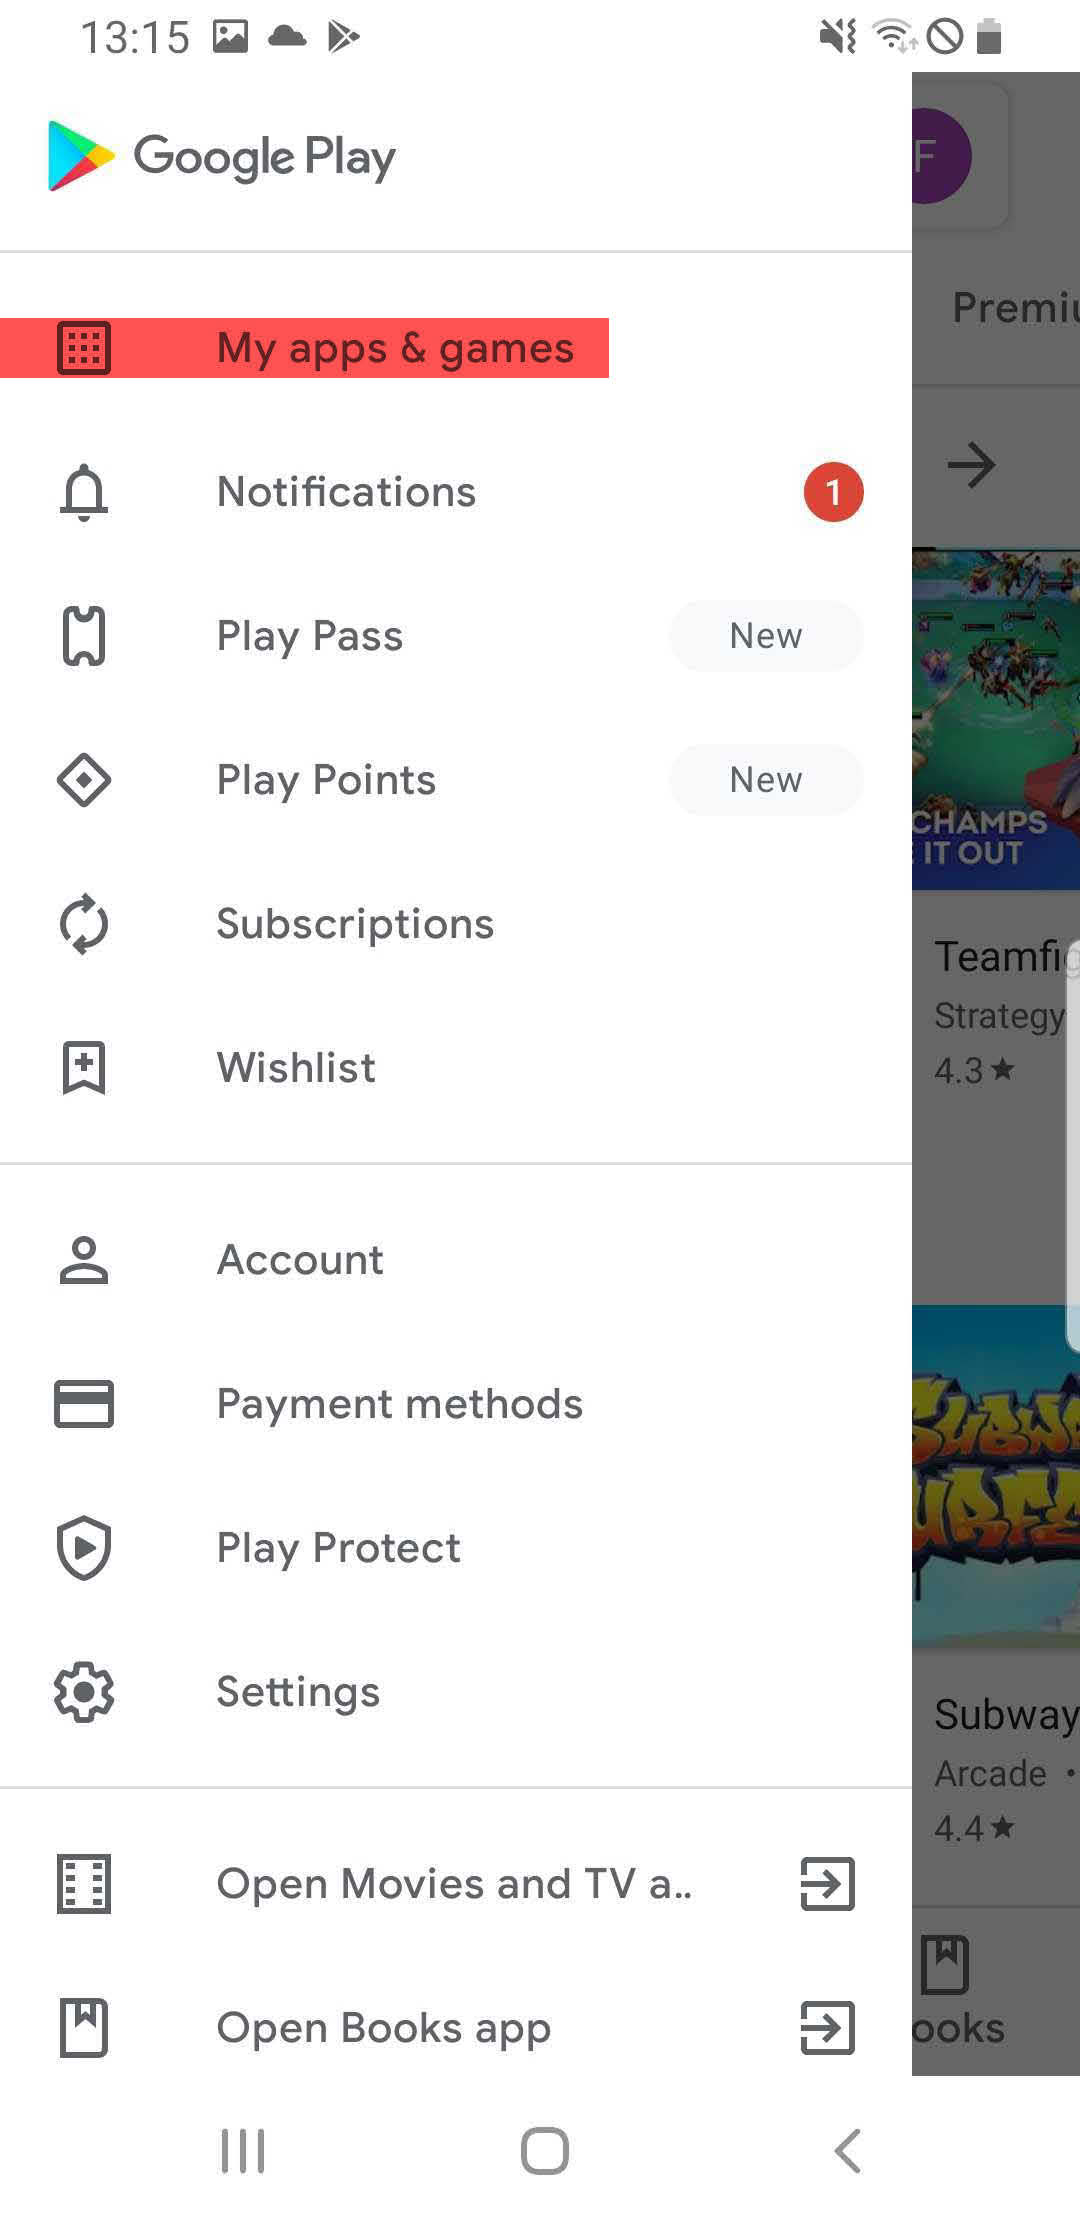 FAQ - frequently asked questions: My apps and games in the Google Play Store